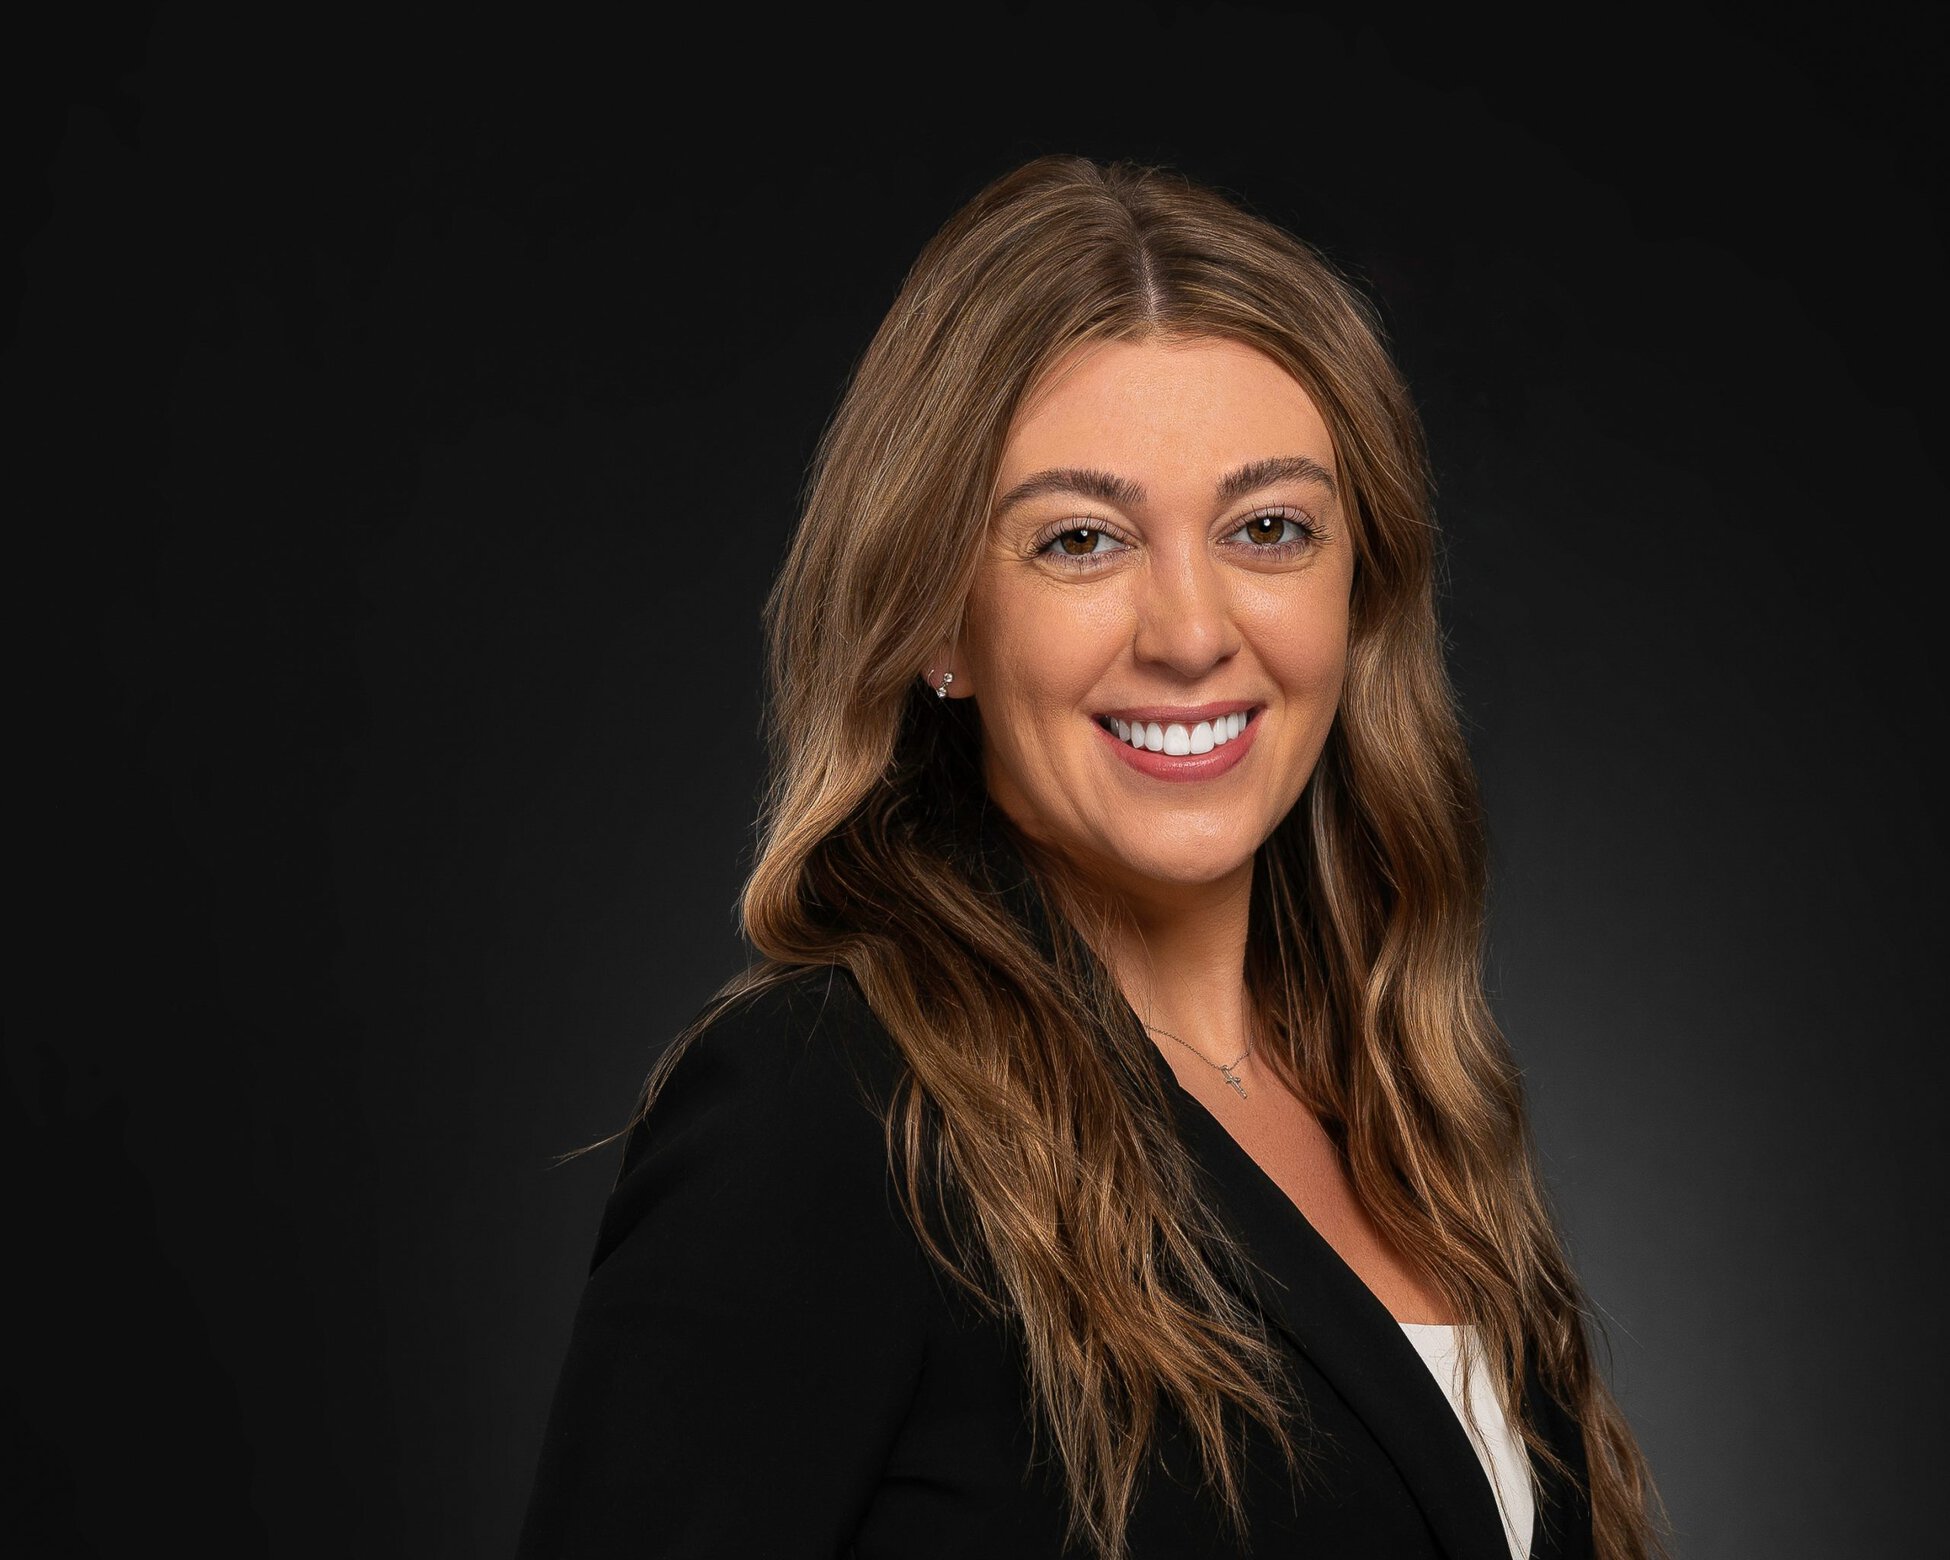 Commercial Real Estate Consultant looking at camera and smiling. Wearing a white top and black blazer for this business formal professional headshot. 